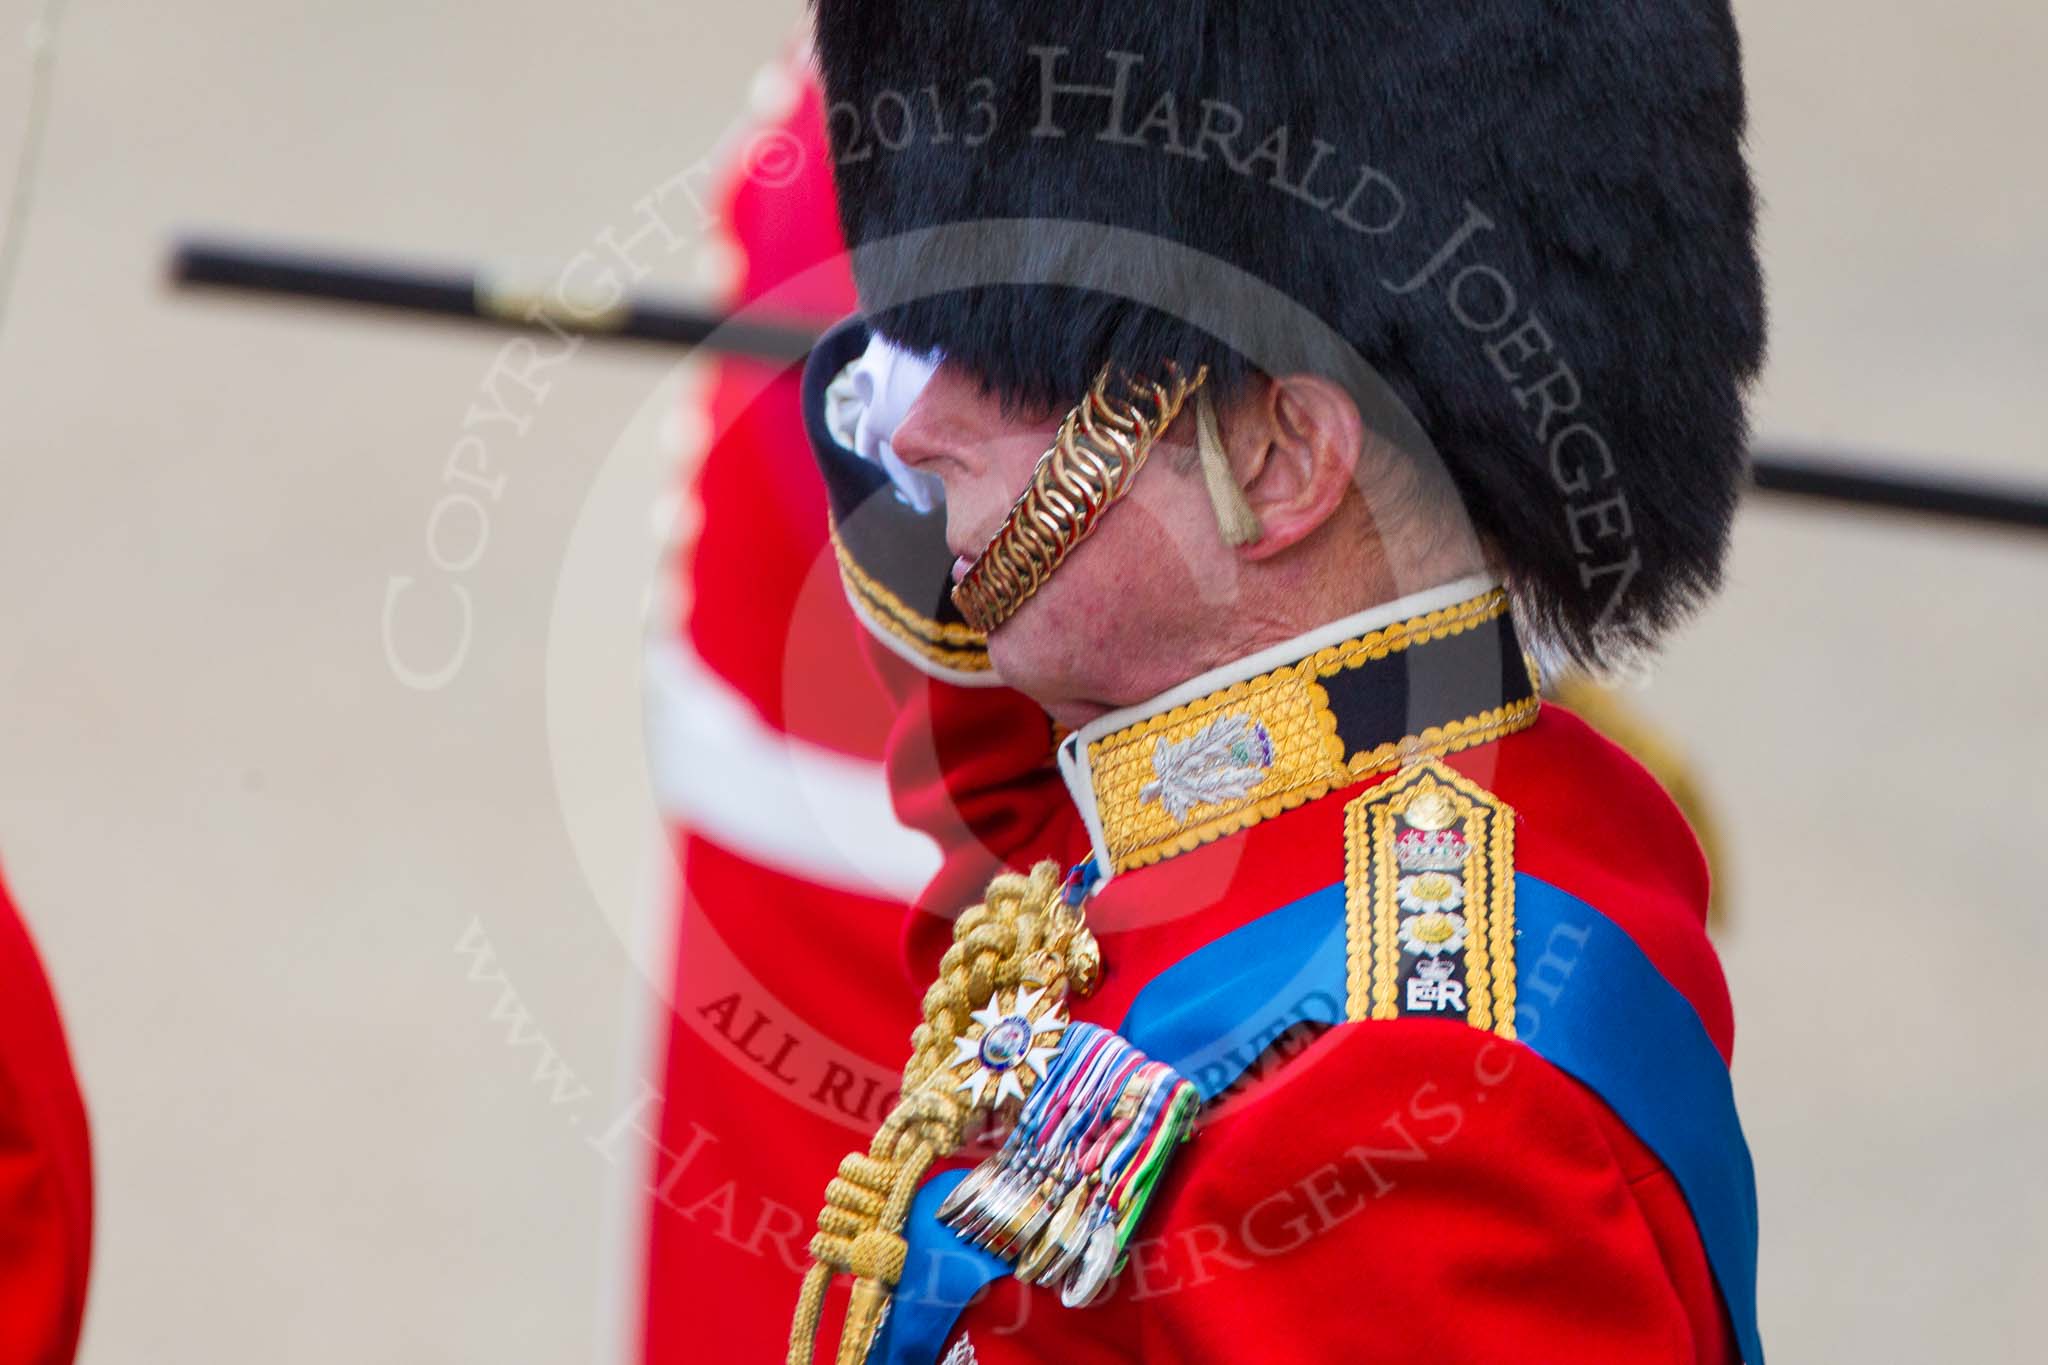 Trooping the Colour 2013: HRH The Duke of Kent, Colonel Scots Guards, while the National Anthem is played. Image #296, 15 June 2013 11:00 Horse Guards Parade, London, UK